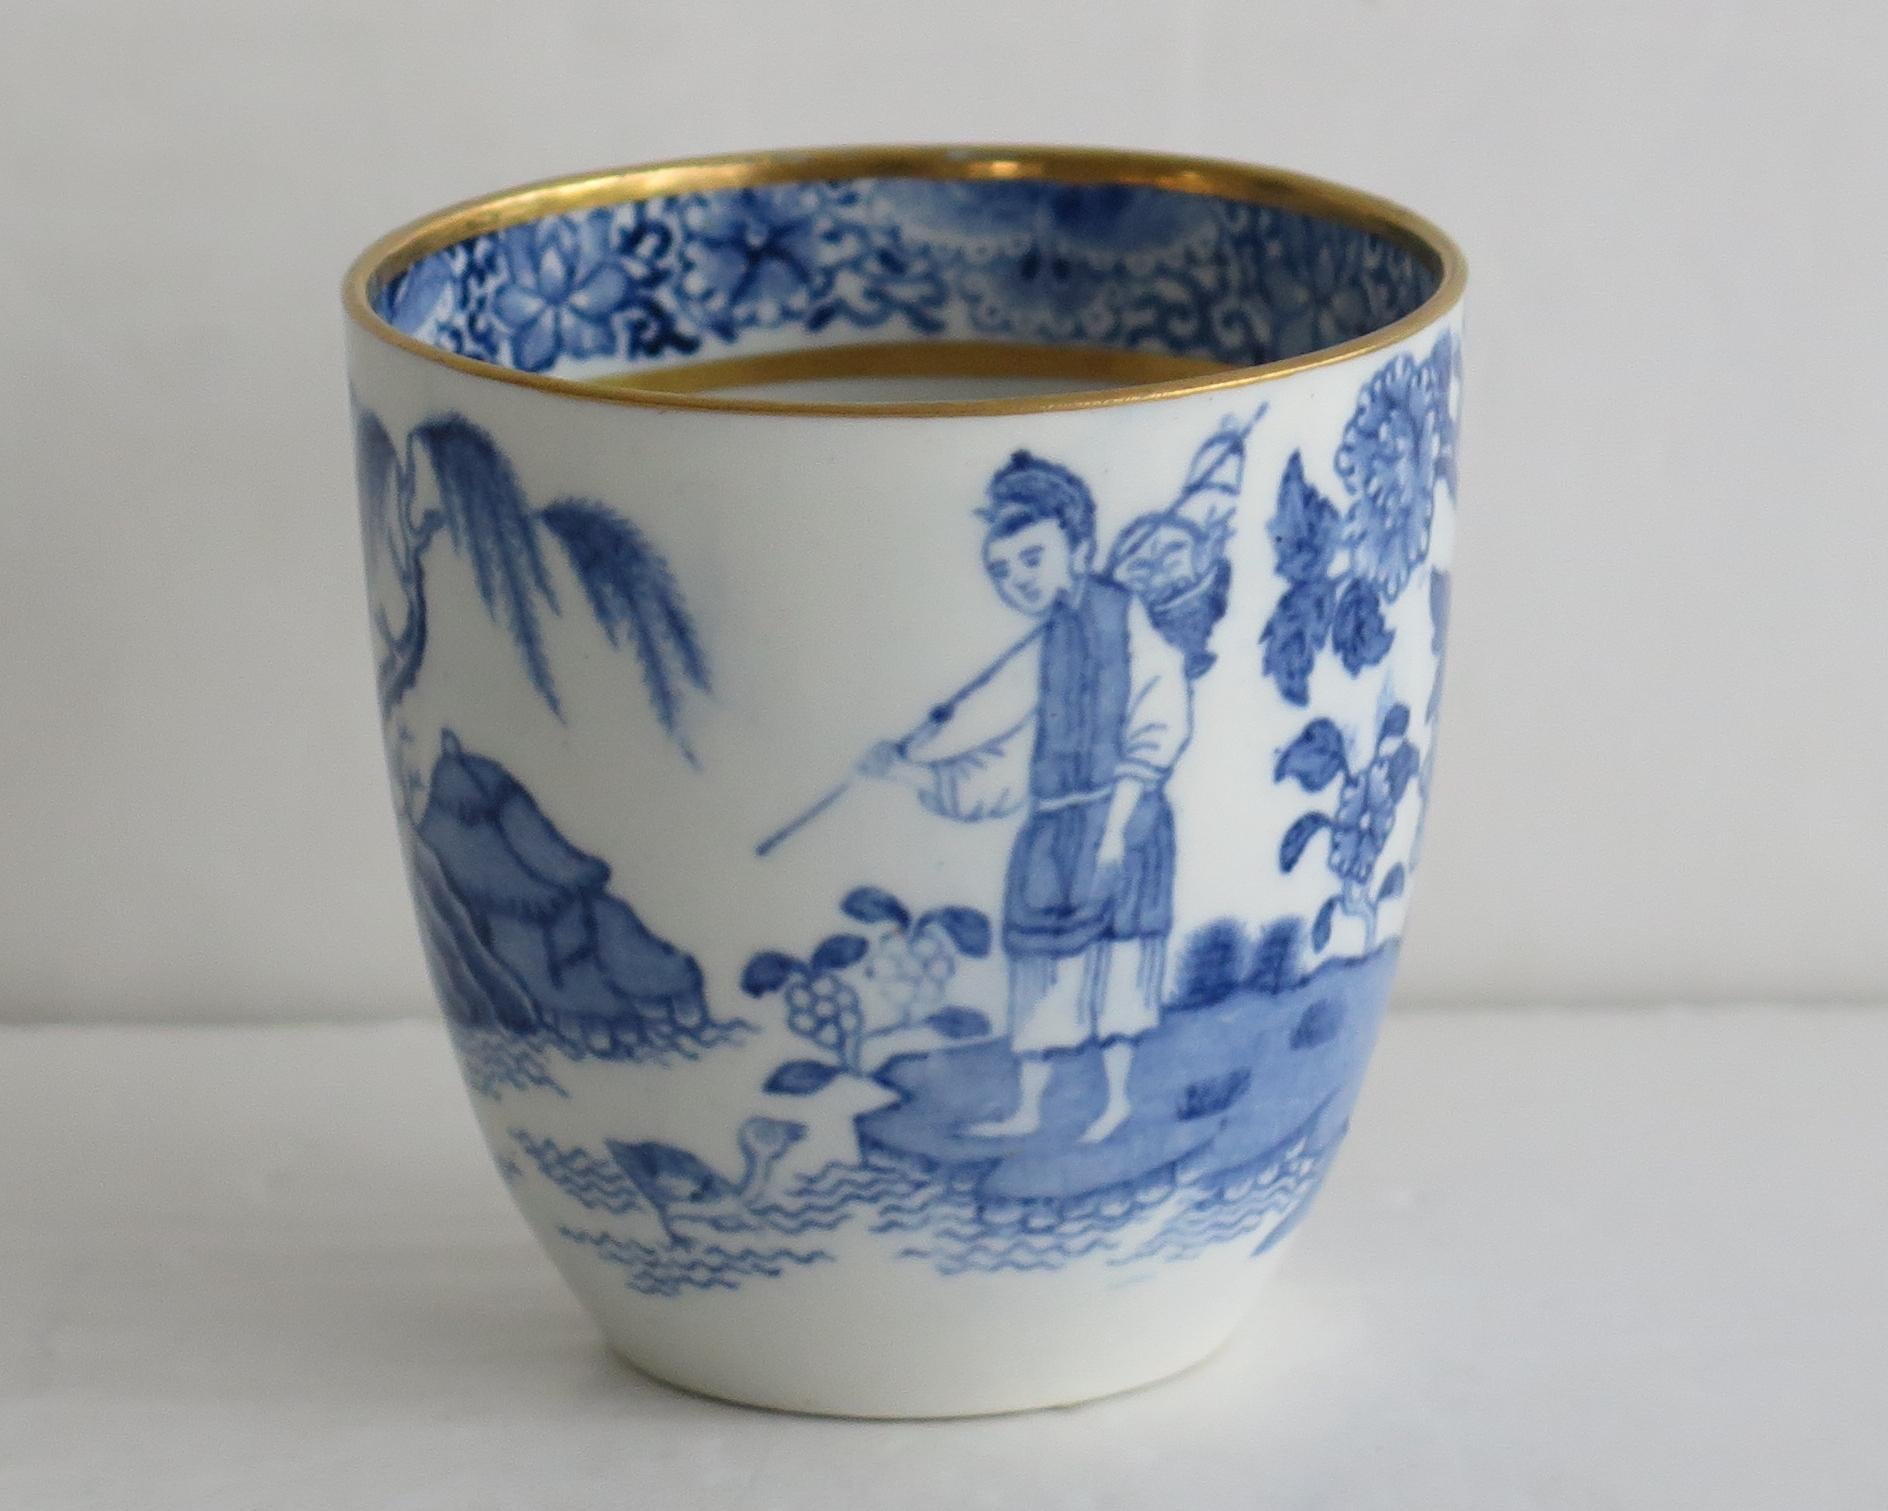 18th Century Rare John Turner Porcelain Cup and Saucer in Traveller Pattern, circa 1795 For Sale